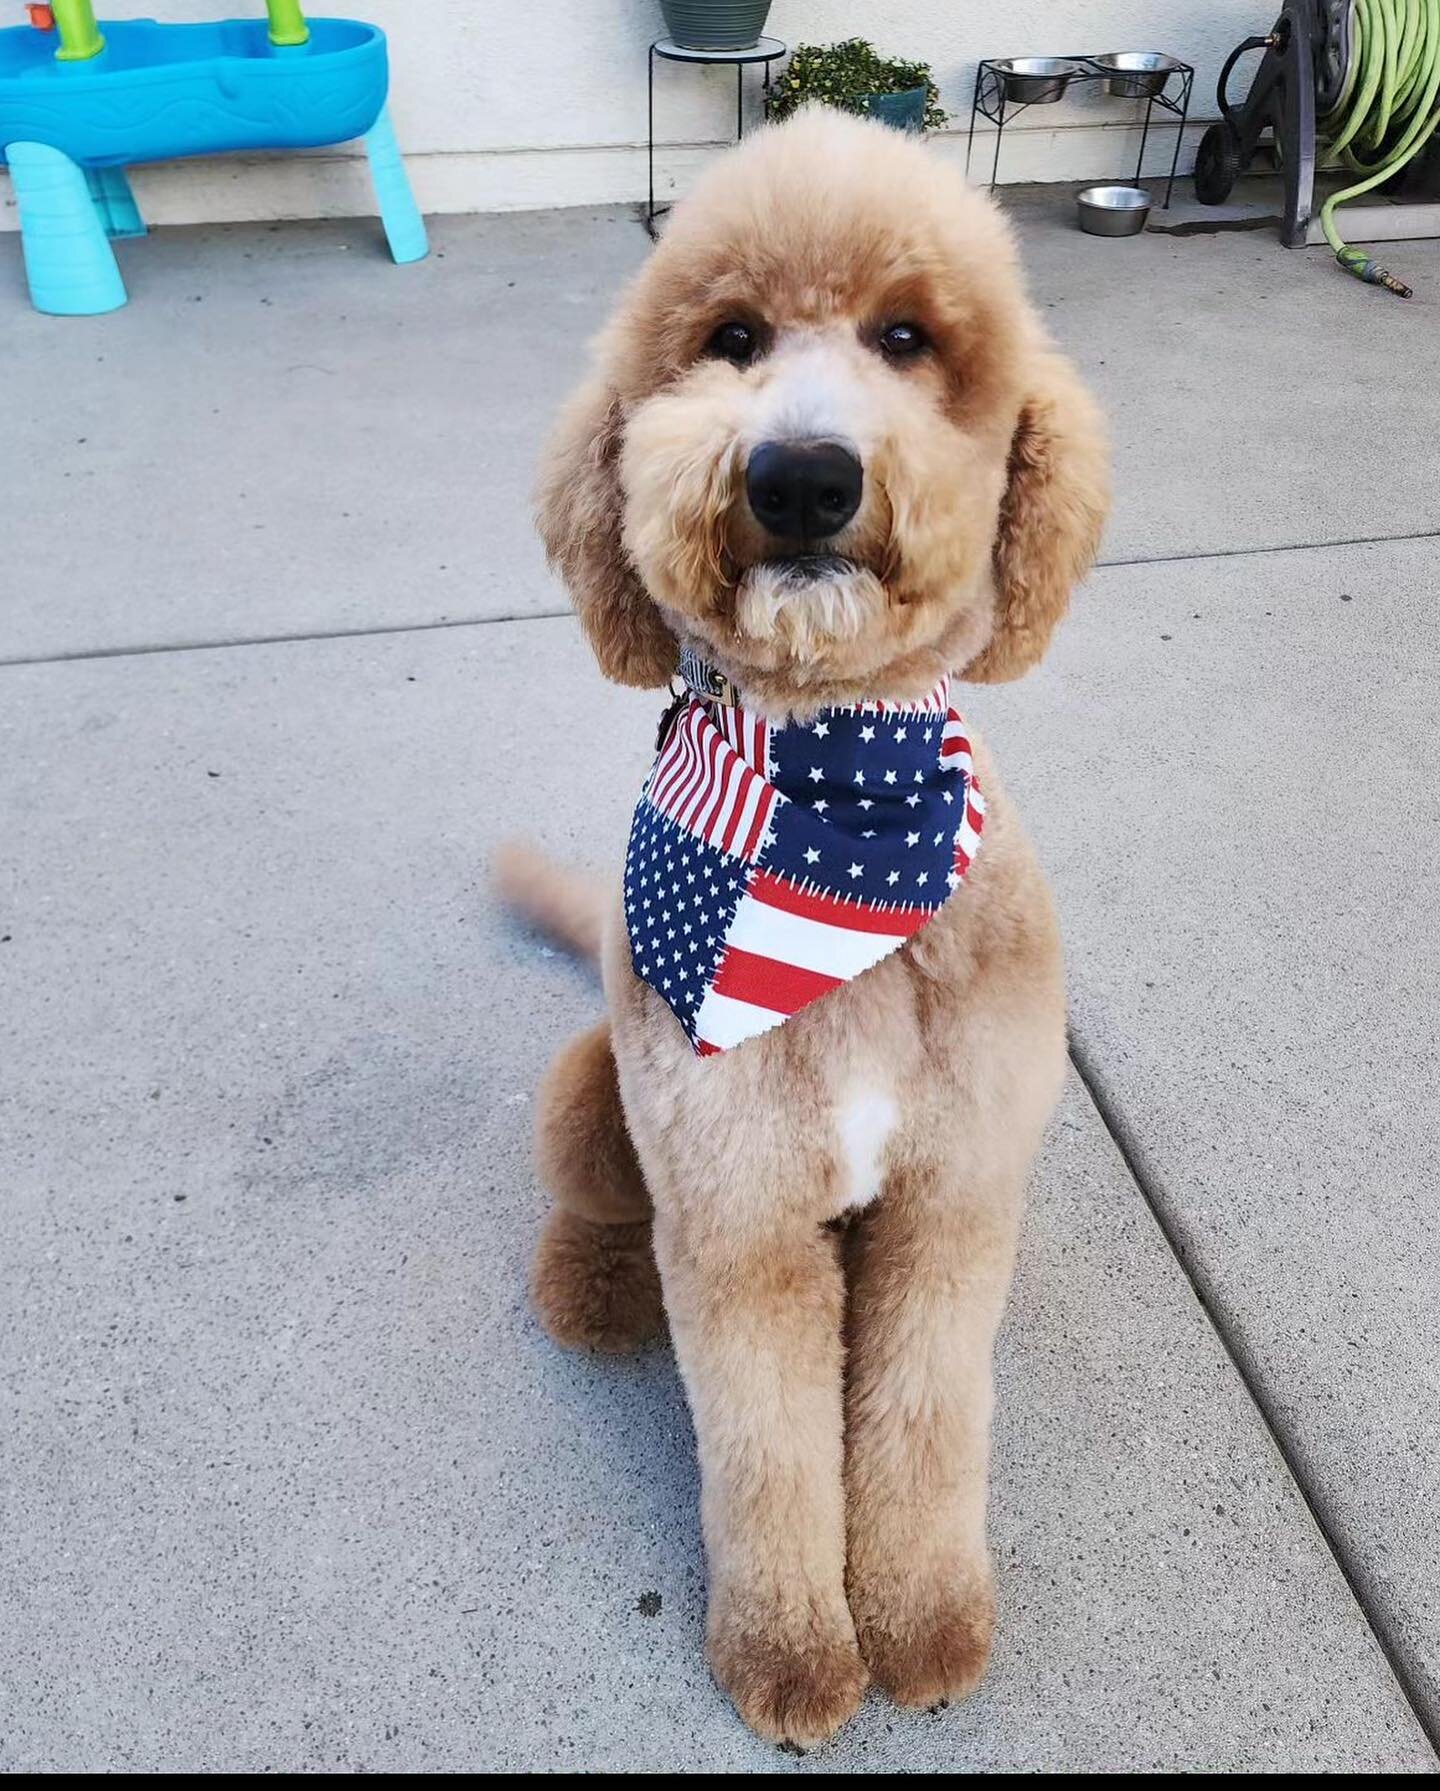 ⭐️⭐️⭐️⭐️⭐️
Here we have Canelo with our Groomer Veronica! 

Canelo is ready to have fun in the Sun ☀️ 🇺🇸

Make sure to book your appointment before the 4th of July 🎆

*first photo is courtesy of @canelo_n_furiends